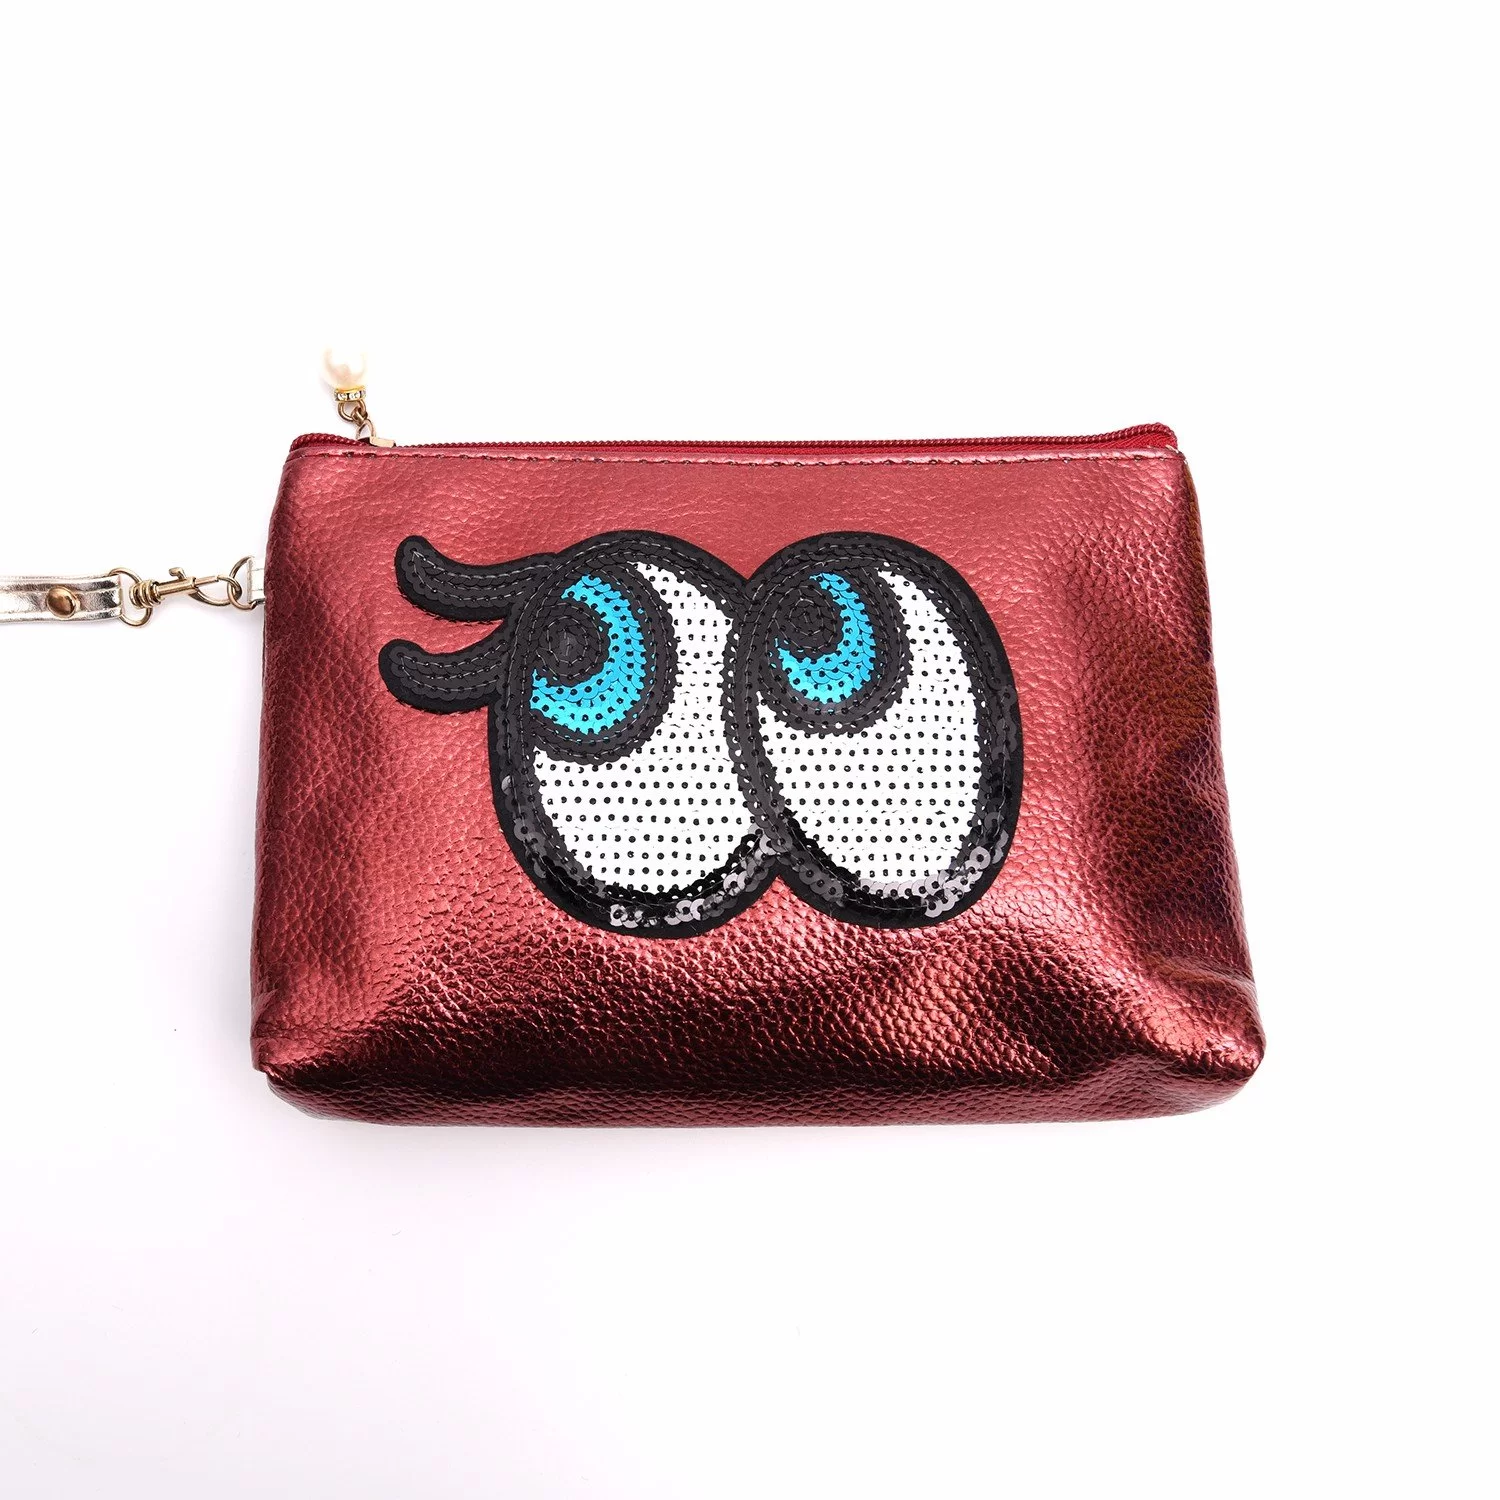 Soft PU Makeup Bag for Purse Travel Cosmetic Pouch with Eyes Image and  Shiny Sequin design